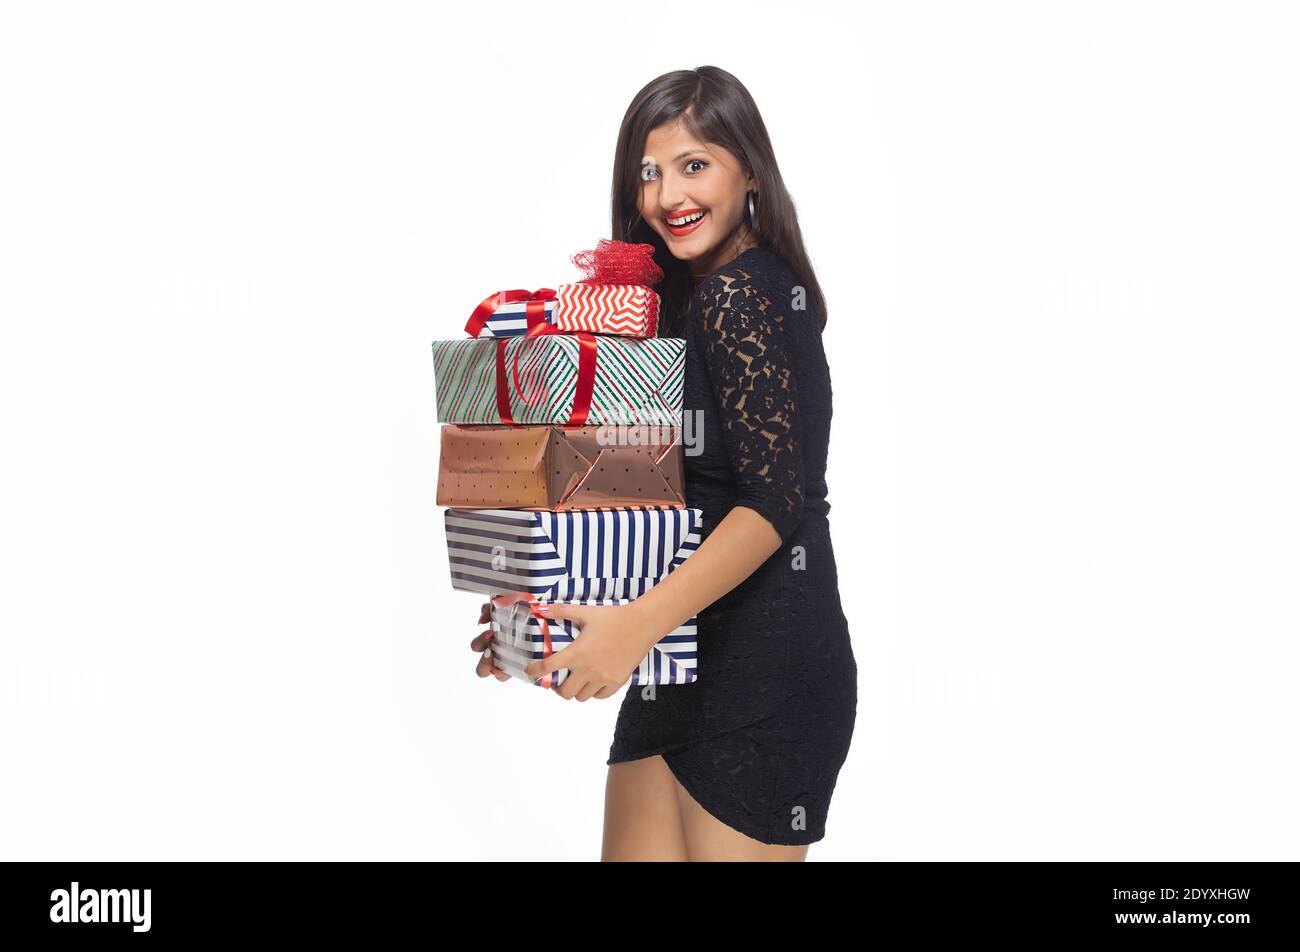 Happy young woman holding gift boxes Stock Photo